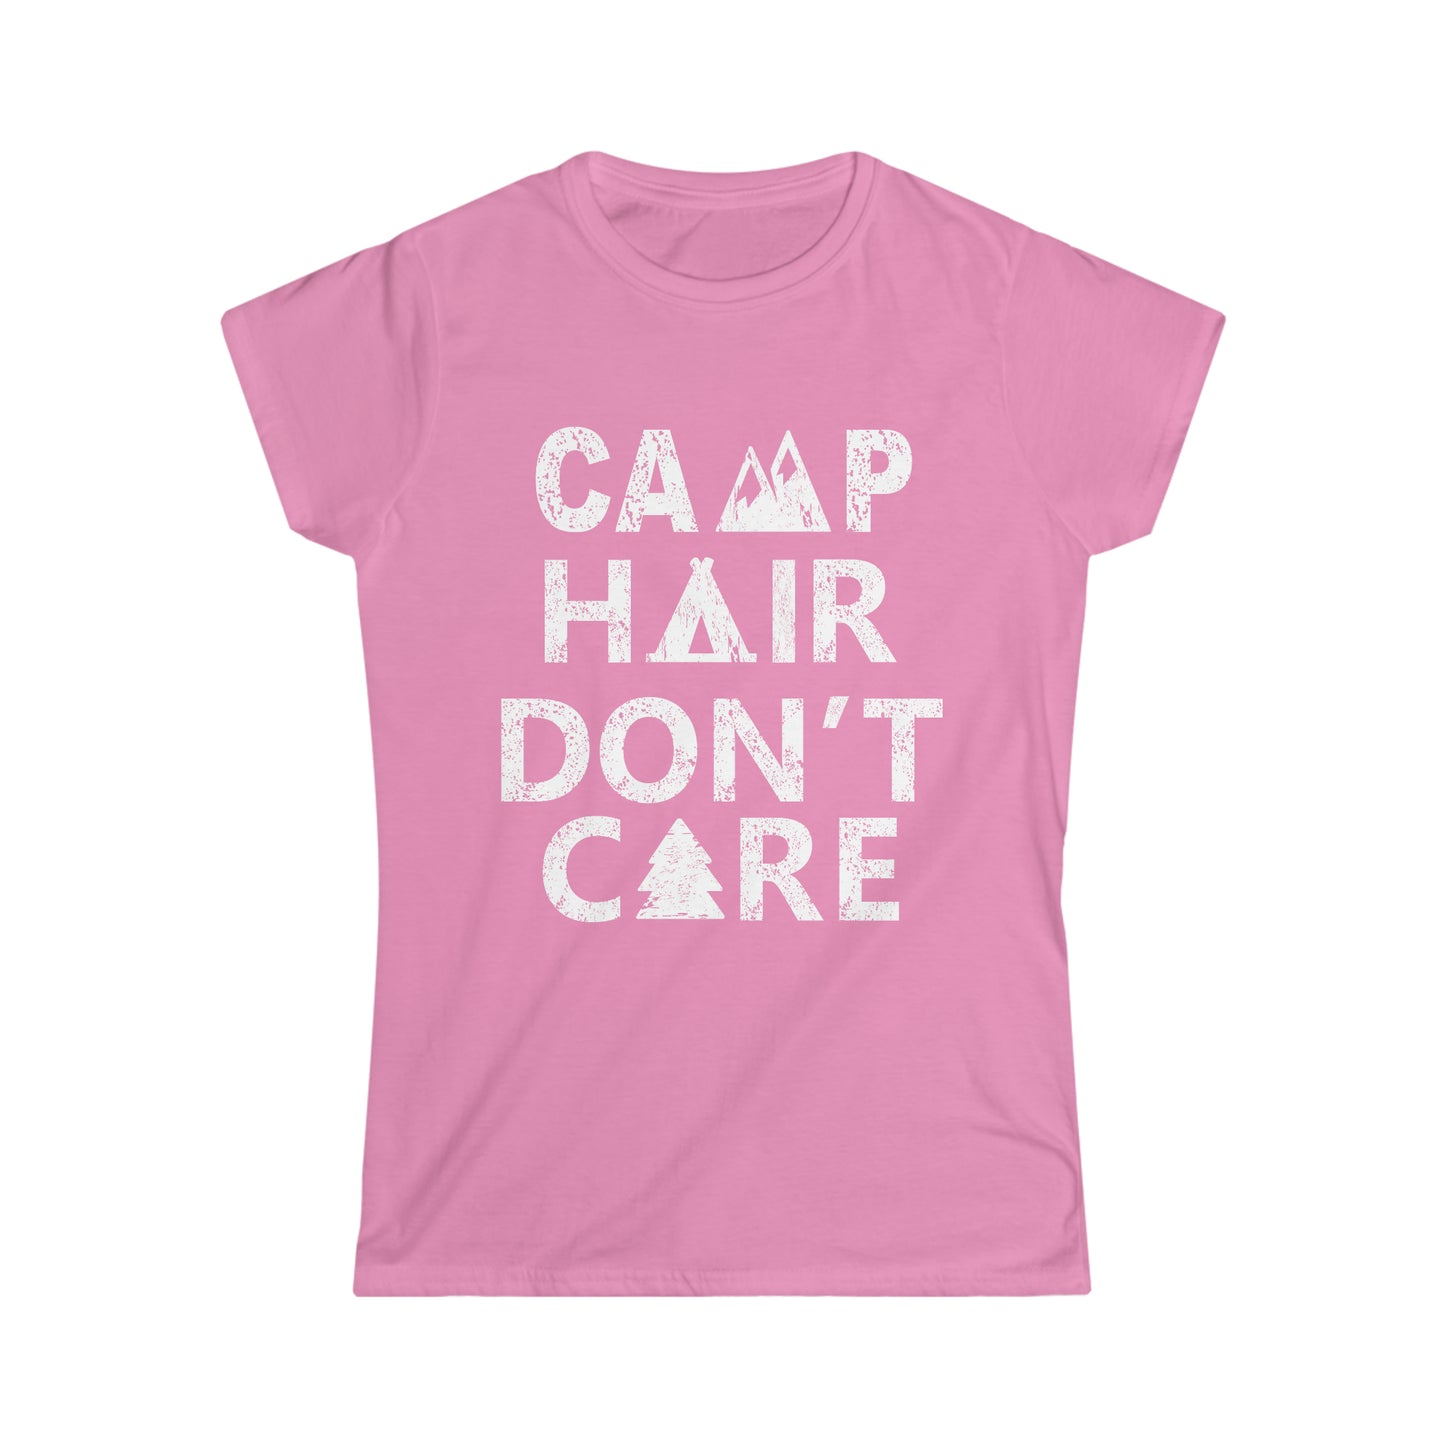 "Camp Hair Don't Care" Women's Softstyle Tee